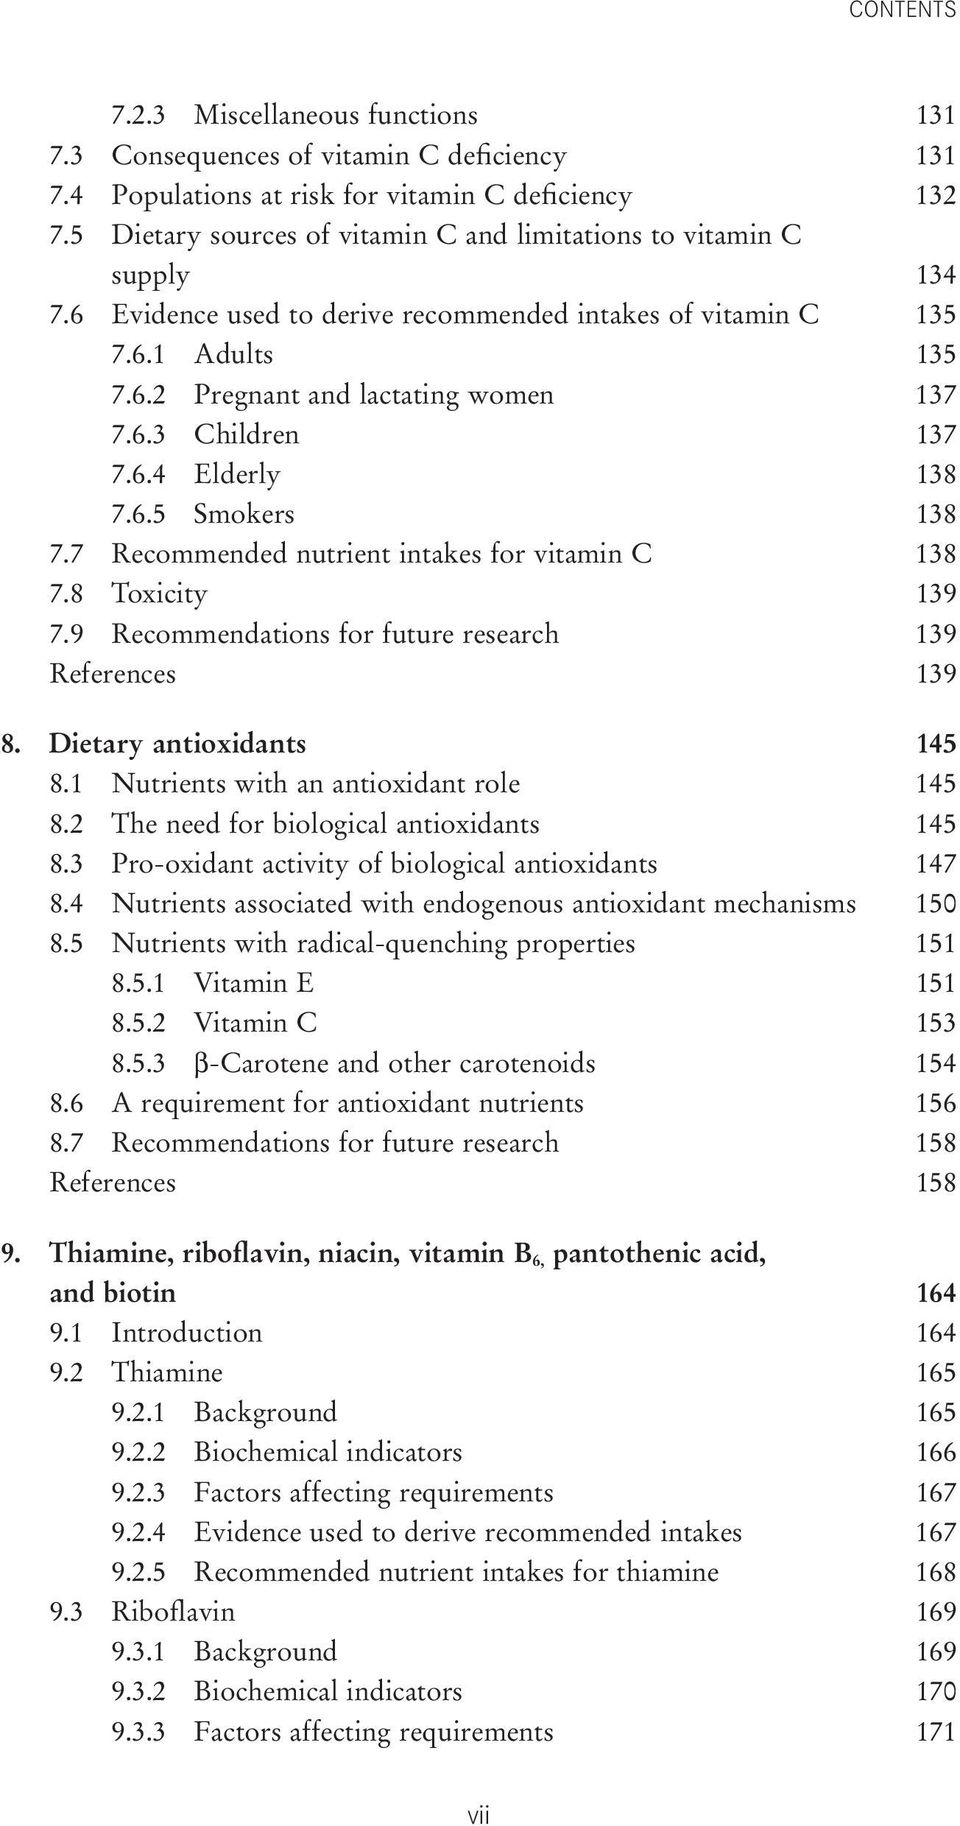 6.4 Elderly 138 7.6.5 Smokers 138 7.7 Recommended nutrient intakes for vitamin C 138 7.8 Toxicity 139 7.9 Recommendations for future research 139 References 139 8. Dietary antioxidants 145 8.